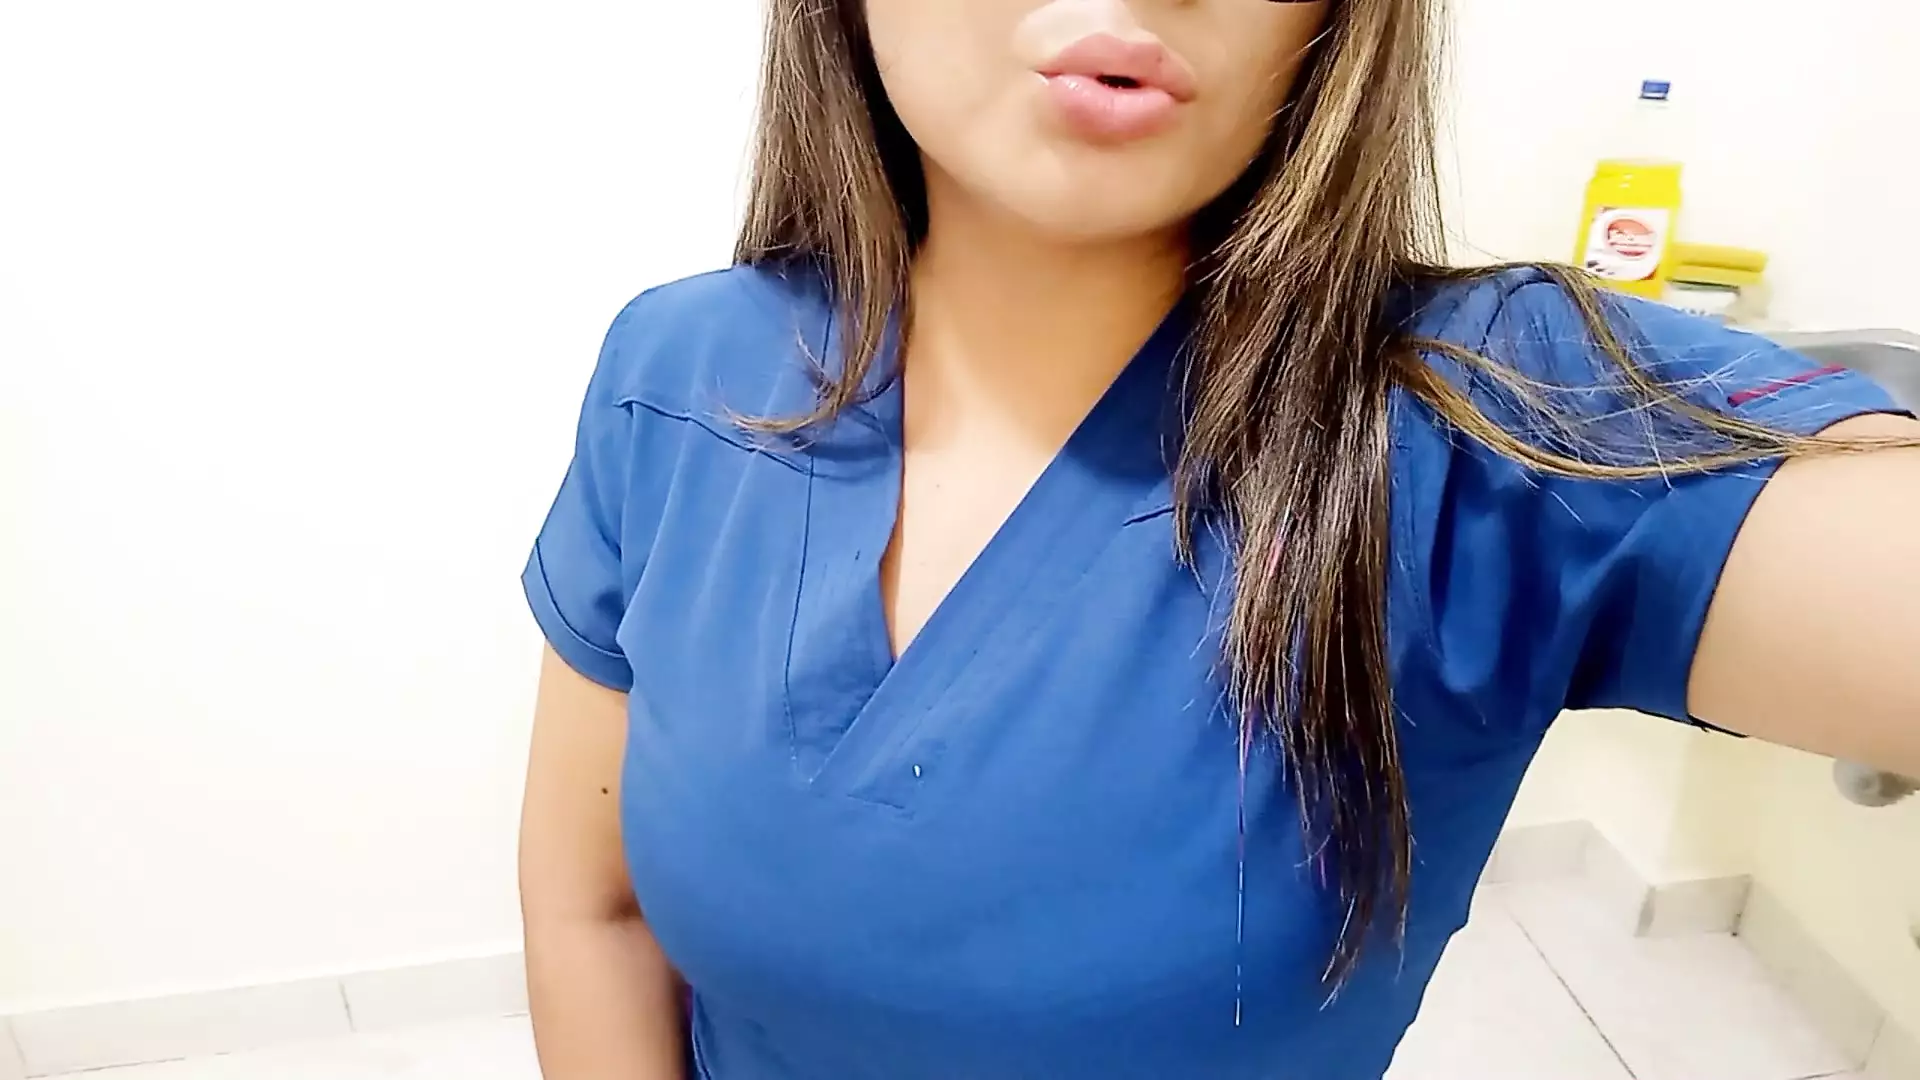 The Nurse Uses Her Bosss Office To Masturbate Live In Front Of Her Community Of Followers picture